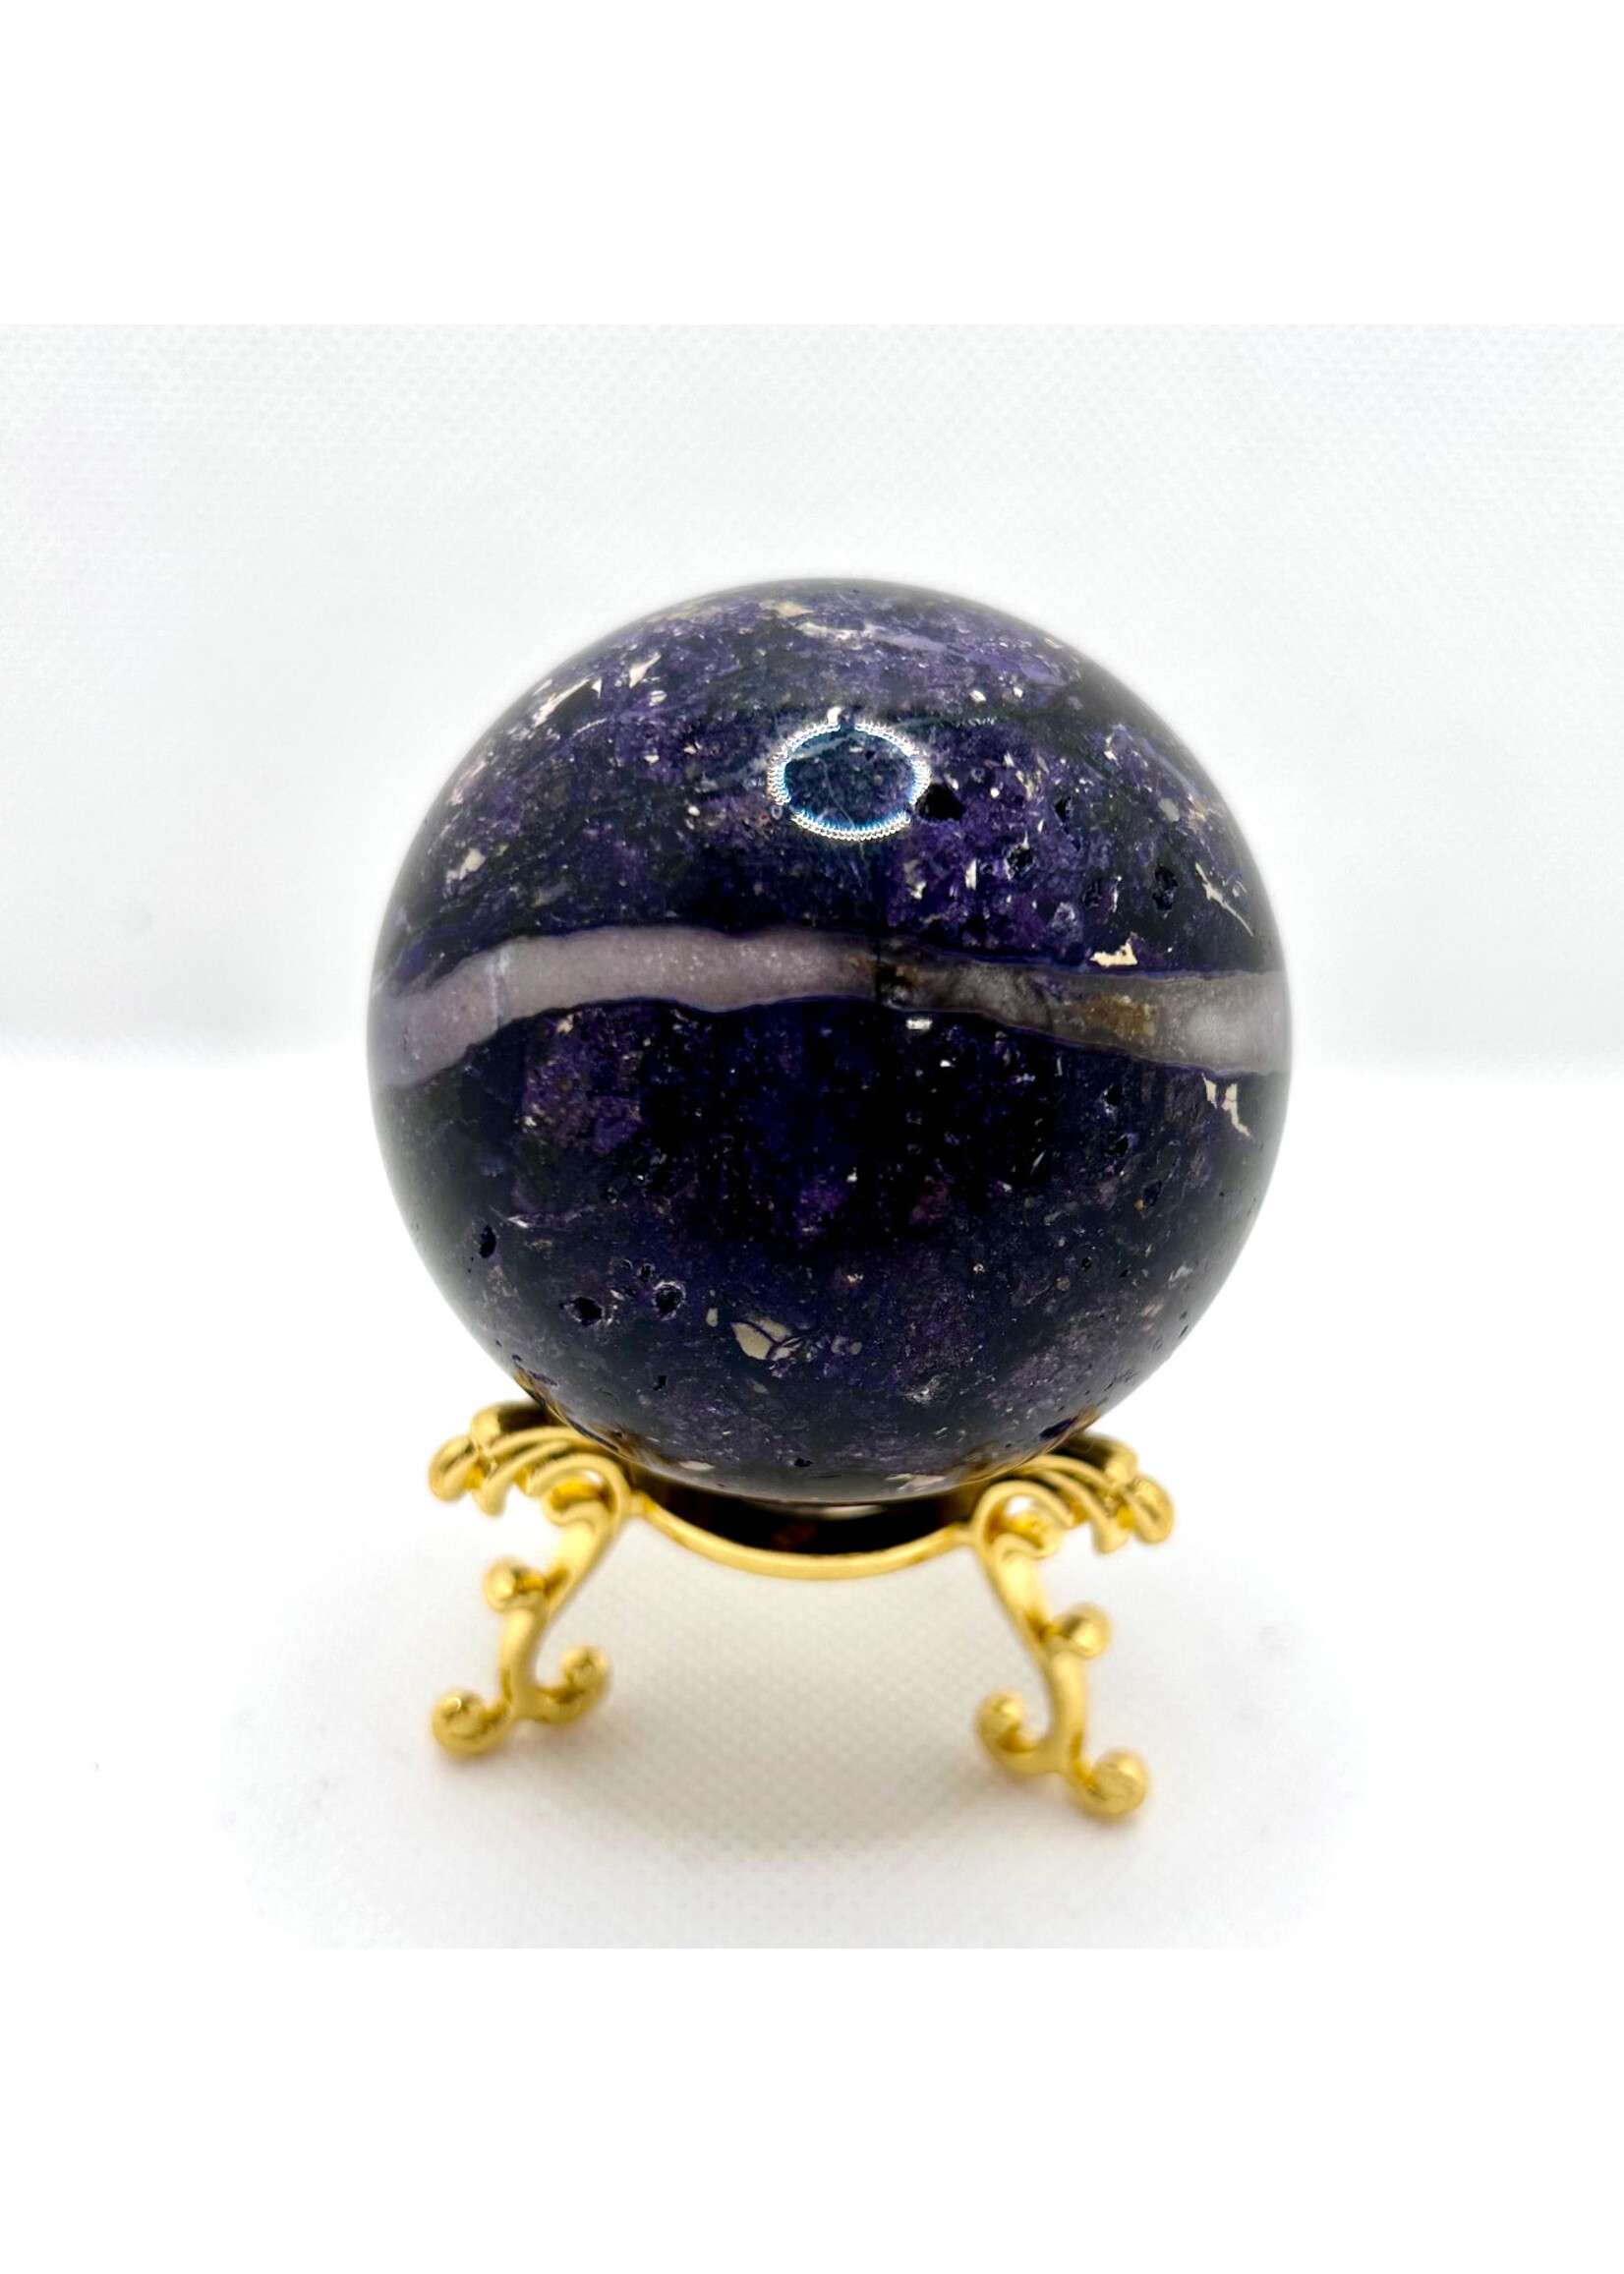 Purple Opaline Fluorite (Tiffany Stone) Spheres for passion and desire